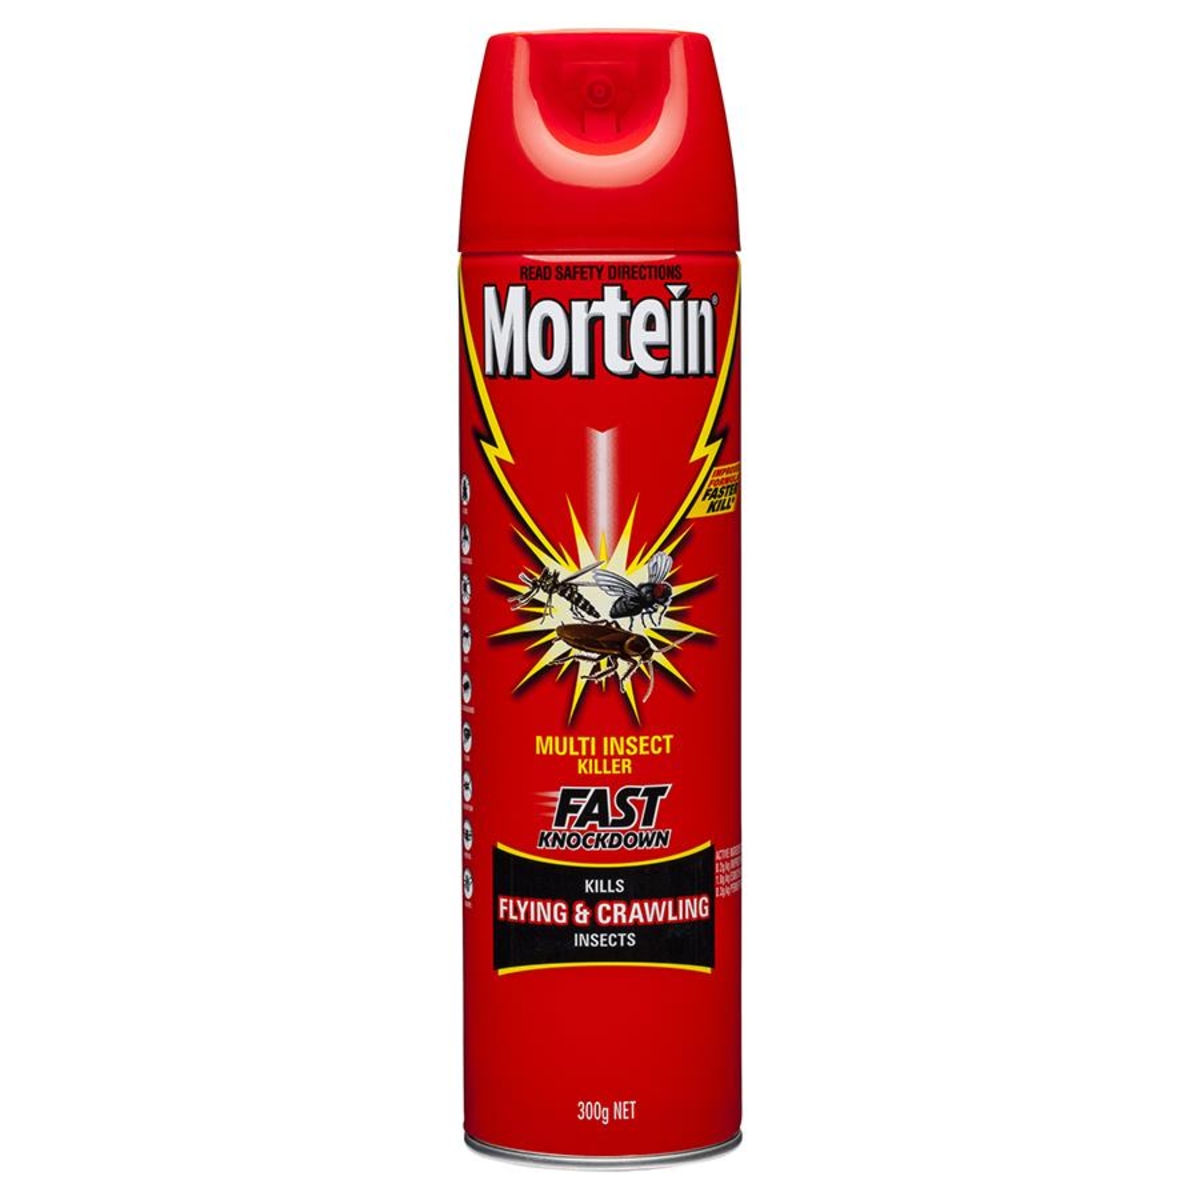 Mortein Fast Knockdown Multi Insect Killer - Flying/Crawling Insects, 300g